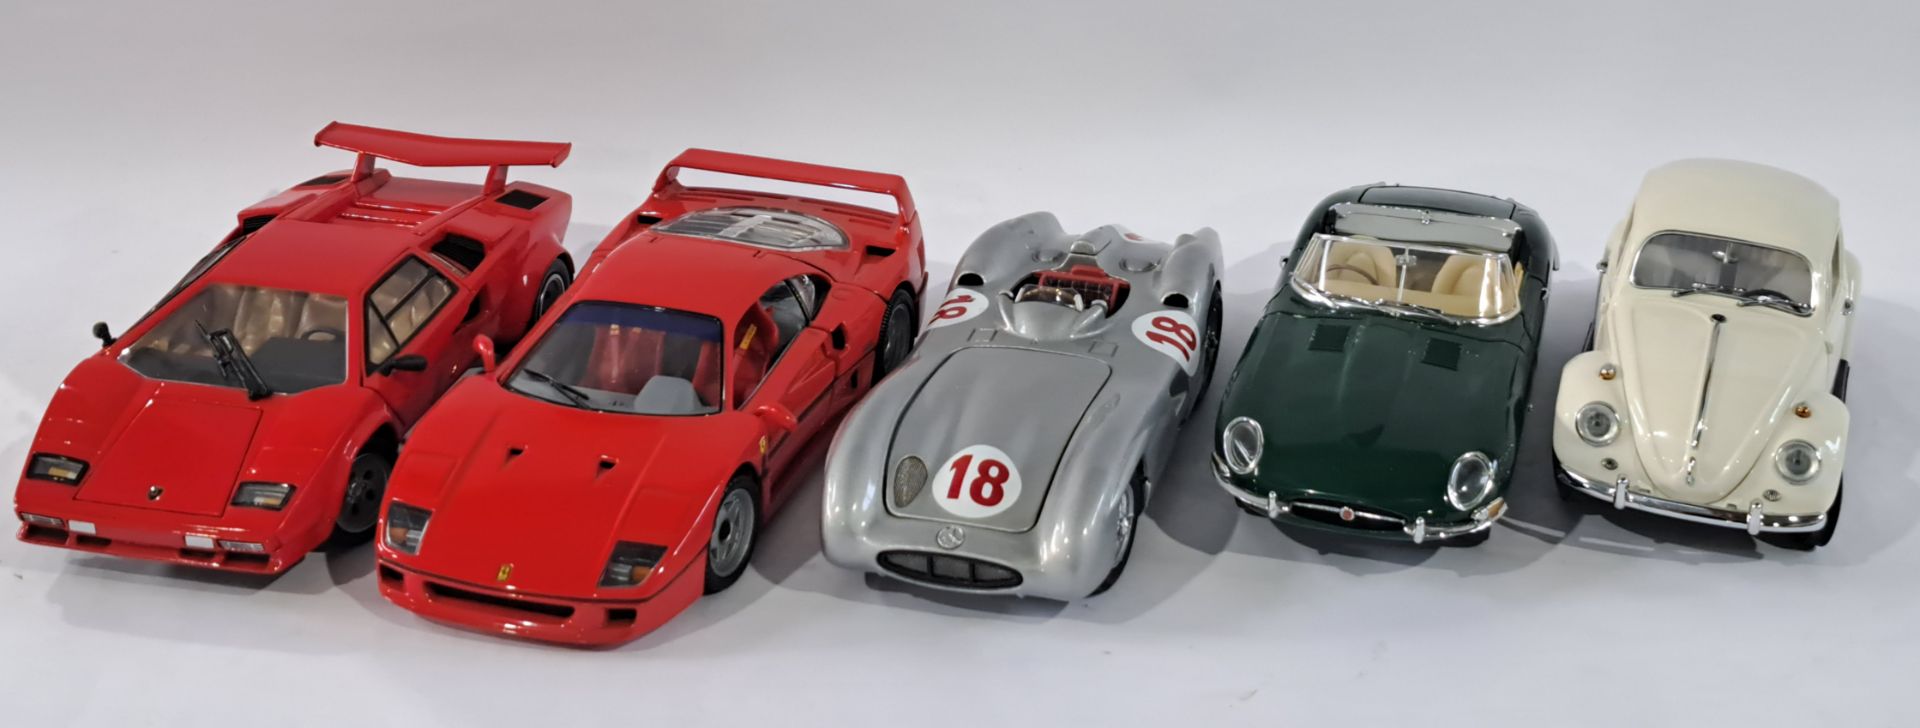 Franklin Mint a Sports/High Performance Car Group to include Ferrari, Mercedes, Lamborghini and s... - Image 2 of 2